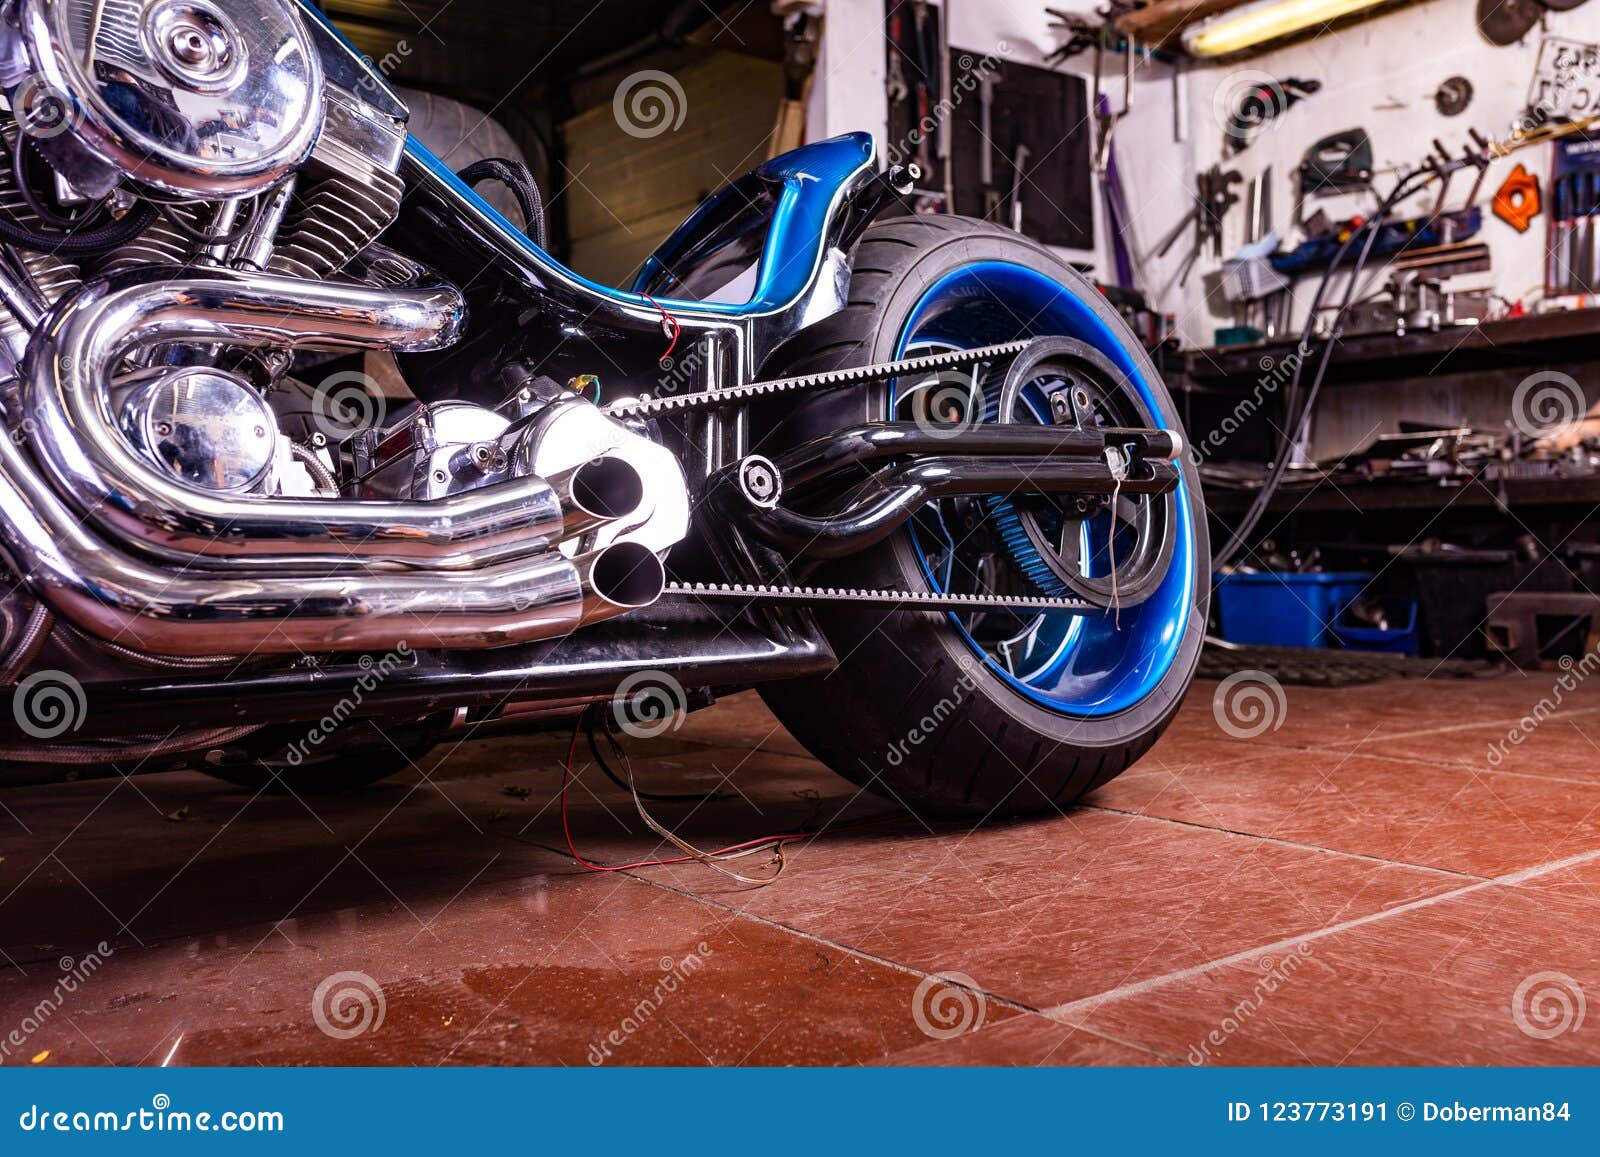 detail on a modern motorcycle in the workshope. motorcycle exhaust. selective focus